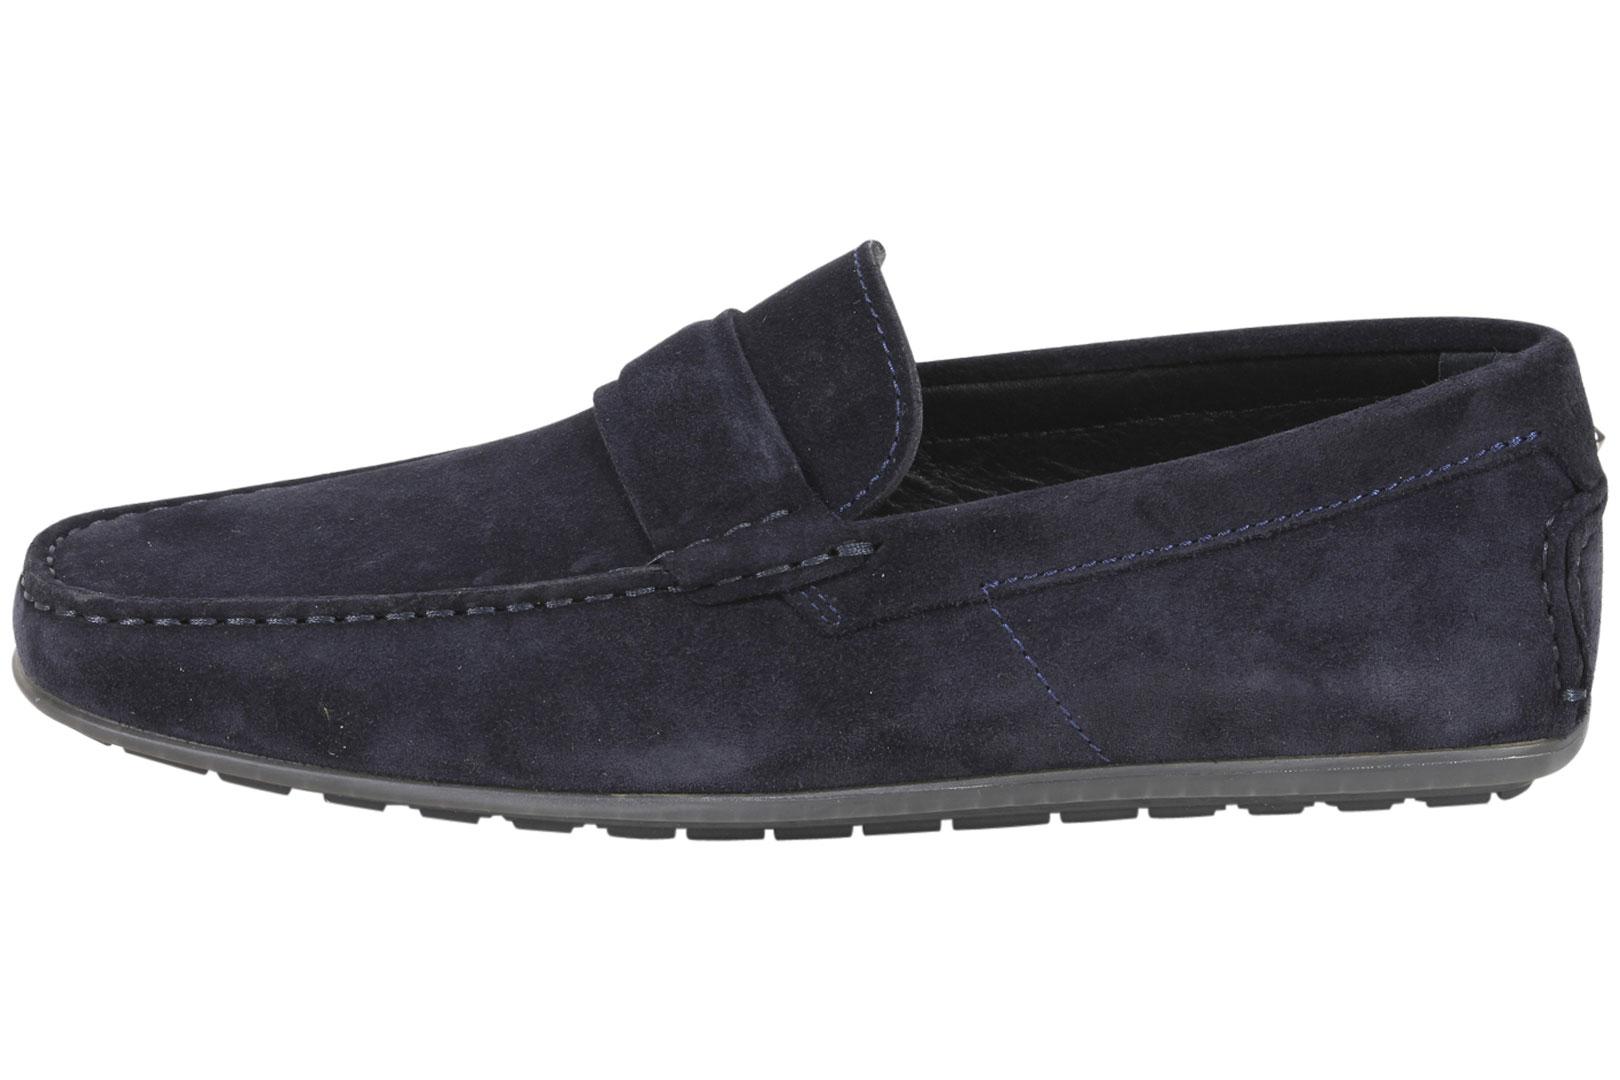 Hugo Boss Mens Dandy Moccasins Loafers Shoes